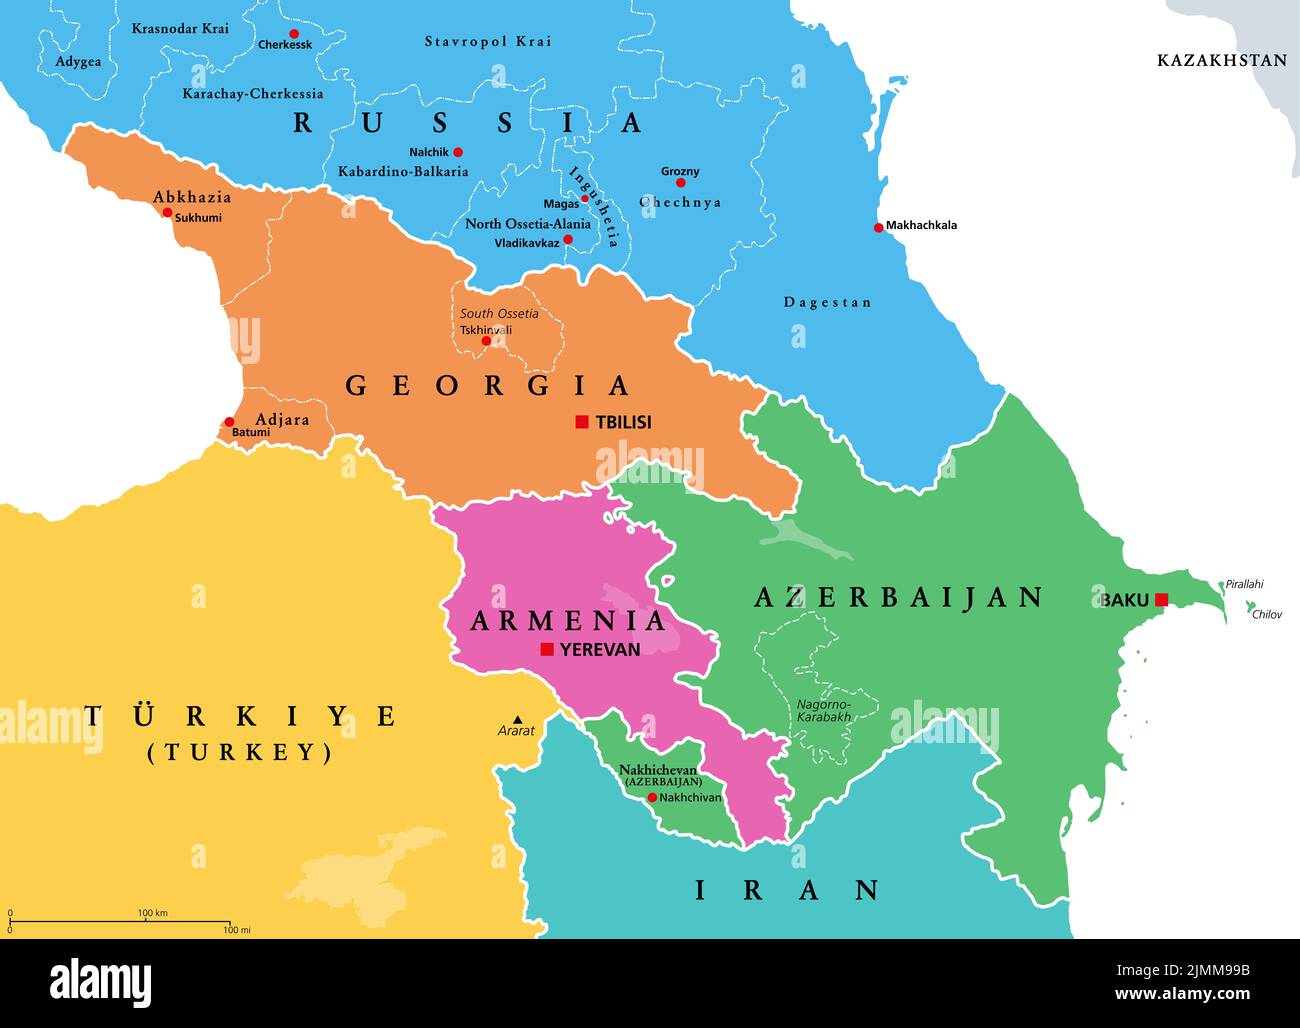 Caucasus, Caucasia, colored political map. Region between Black and Caspian Sea, mainly occupied by Armenia, Azerbaijan, Georgia, and Southern Russia. Stock Photo